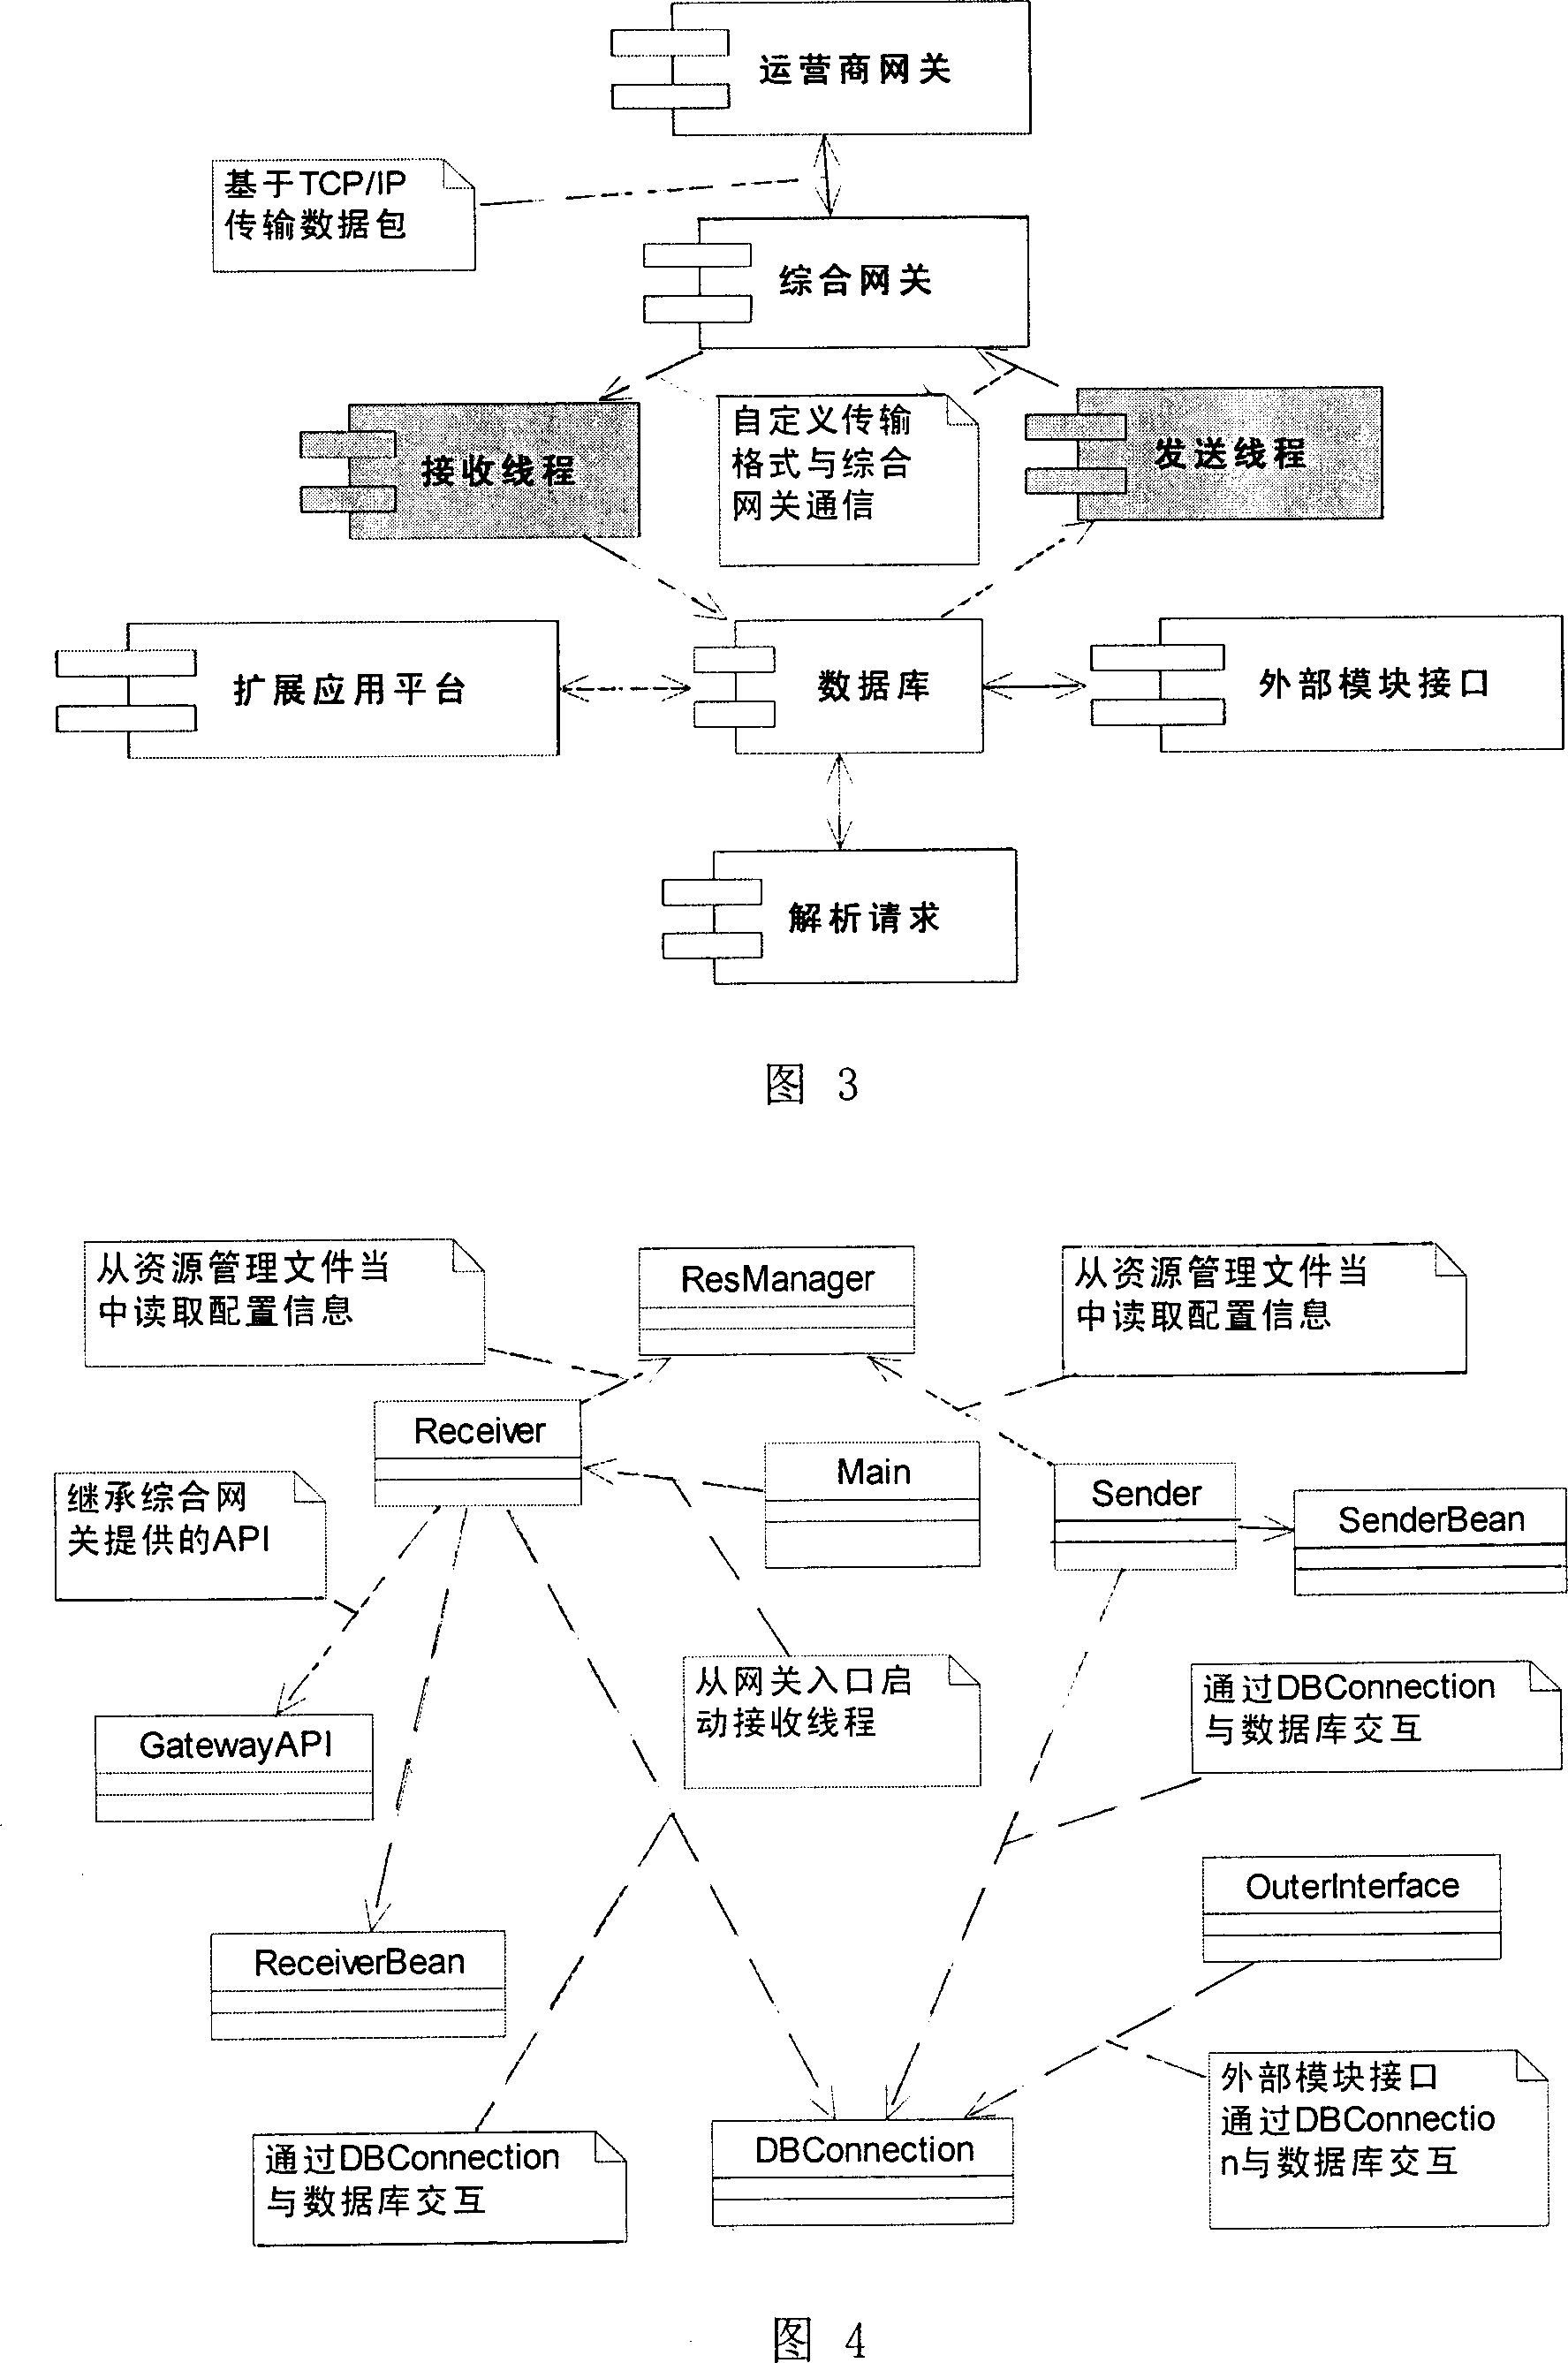 Method and system for checking real name by using radio terminal